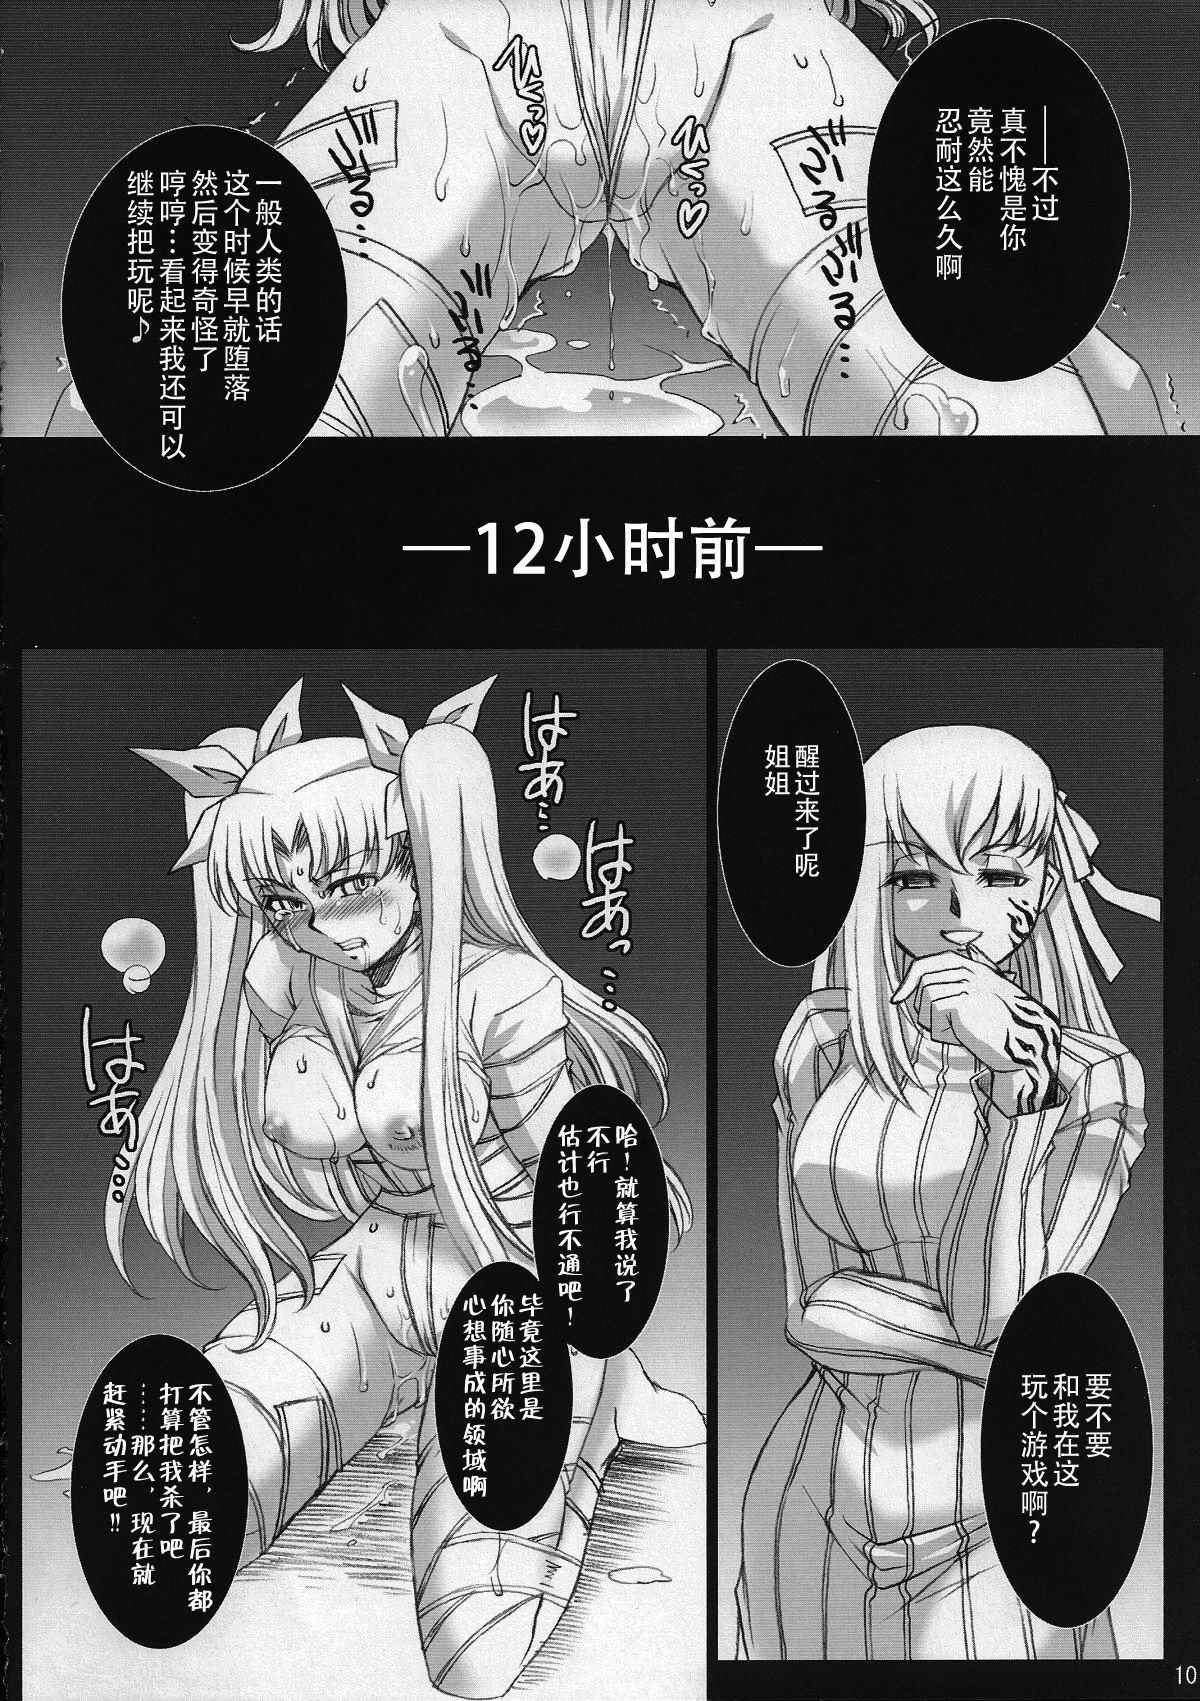 (COMIC1☆2) [H.B (B-RIVER)] Red Degeneration -DAY/3- (Fate/stay night) [Chinese] [不咕鸟汉化组] page 9 full